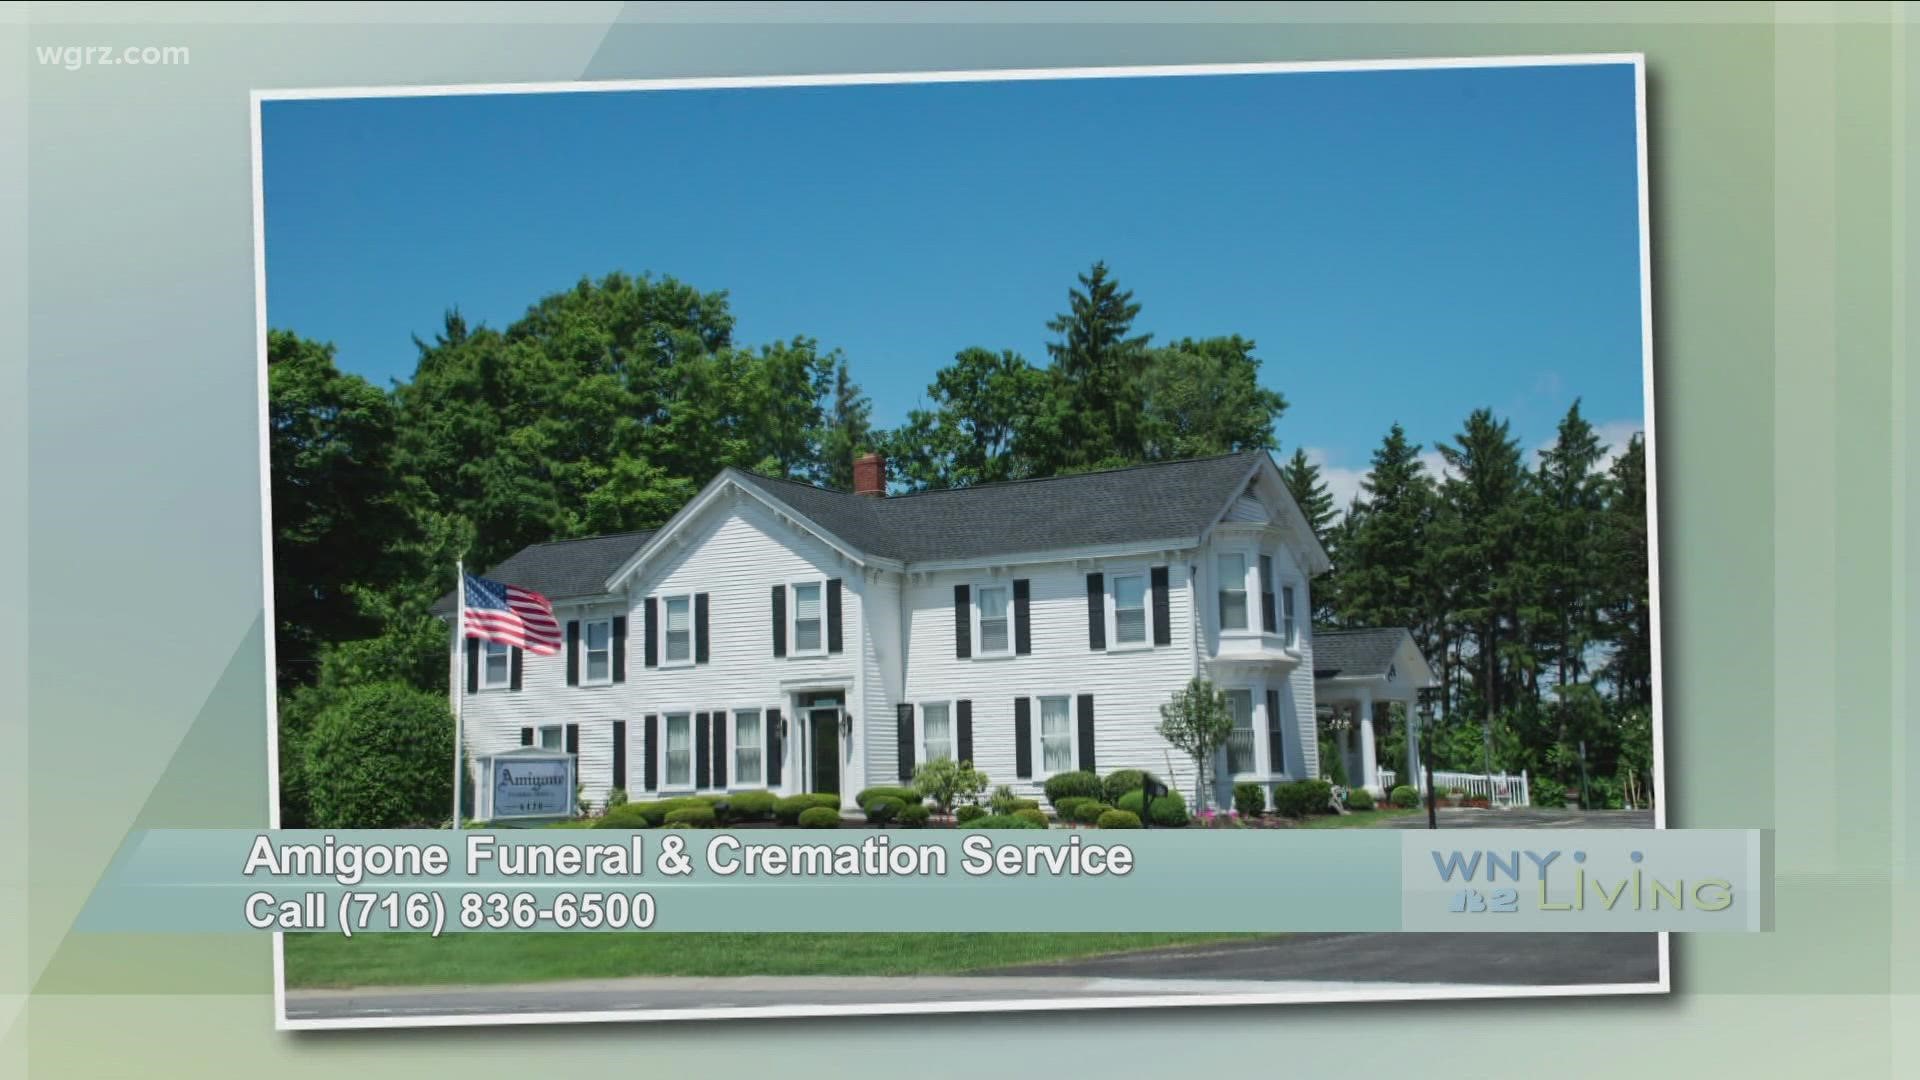 WNY Living - August 28 - Amigone Funeral & Cremation Service (THIS VIDEO IS SPONSORED BY AMIGONE FUNERAL & CREMATION SERVICE)